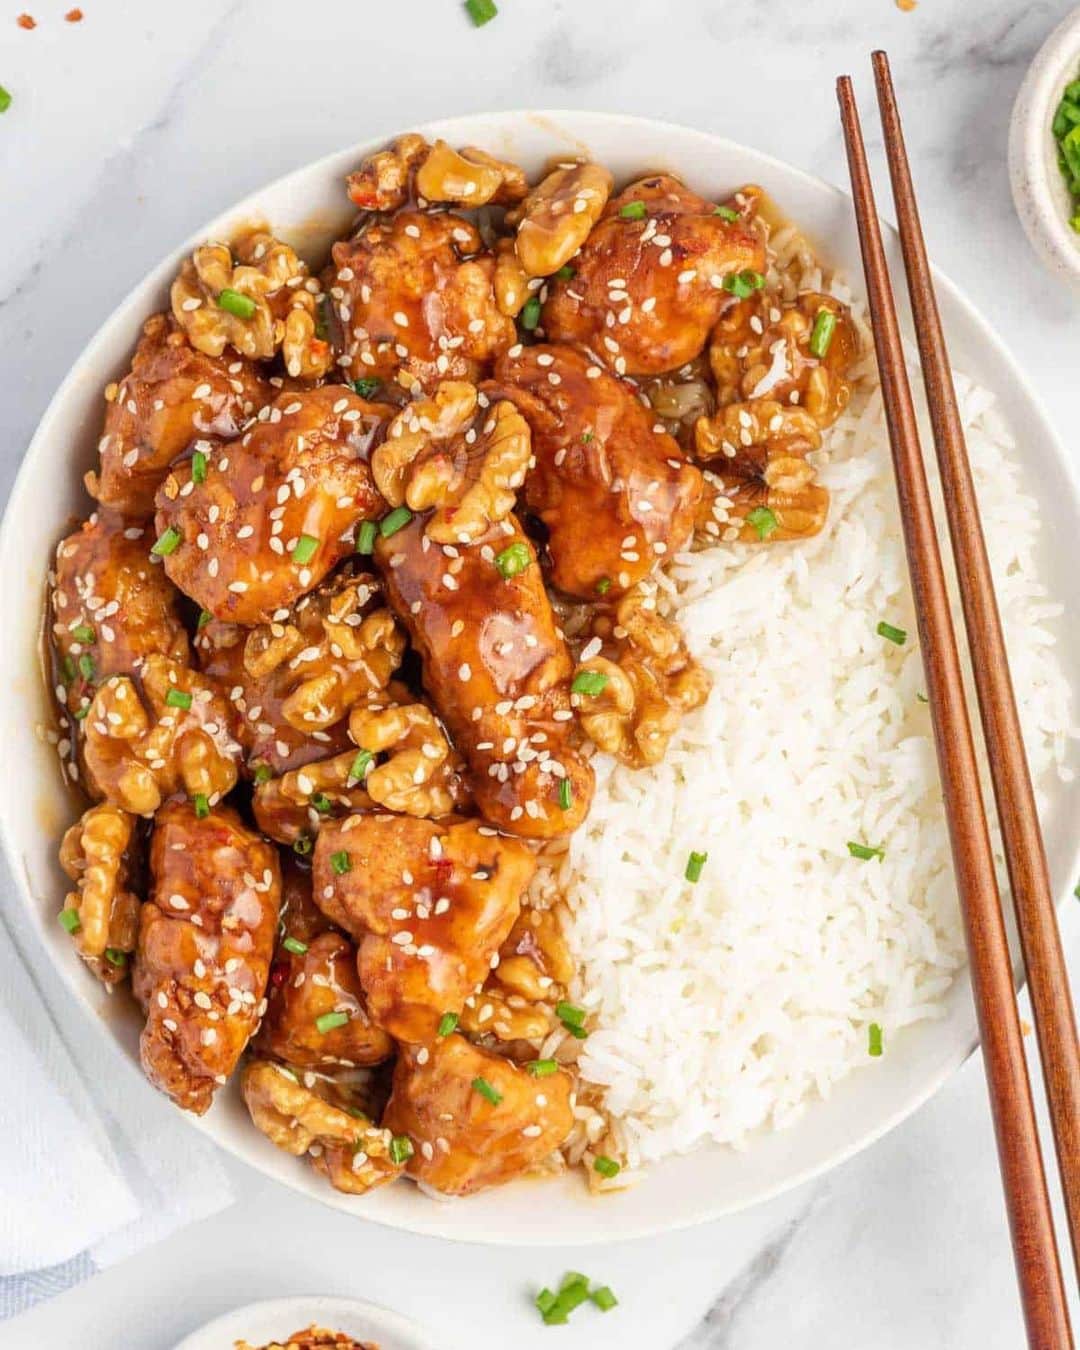 Easy Recipesのインスタグラム：「A popular Chinese dish, this Honey Walnut Chicken comes together easily in a few simple steps. Crispy, deep-fried chicken tossed with crunchy walnuts and then coated in a delicious honey sauce. This recipe will be loved by your entire family. It tastes just like what you’d get at a restaurant!  Full recipe link in my bio @cookinwithmima  https://www.cookinwithmima.com/honey-walnut-chicken/」